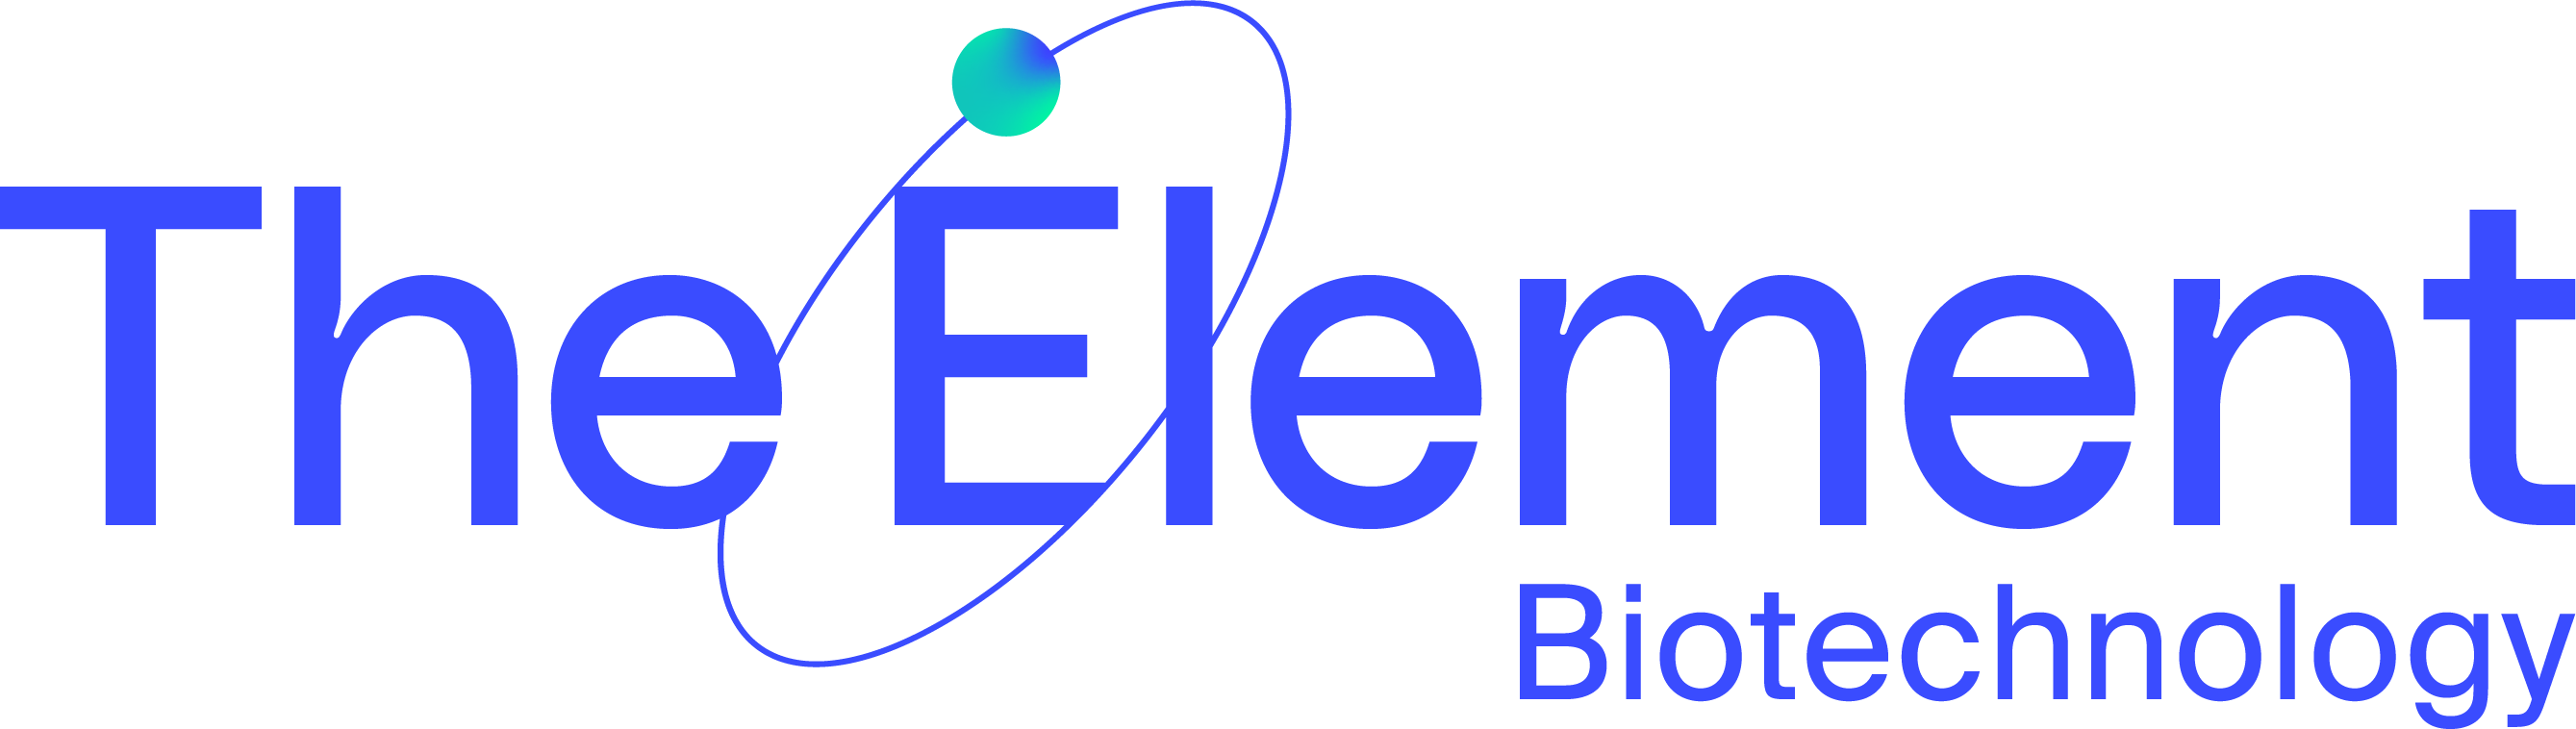 THE ELEMENT Biotechnology